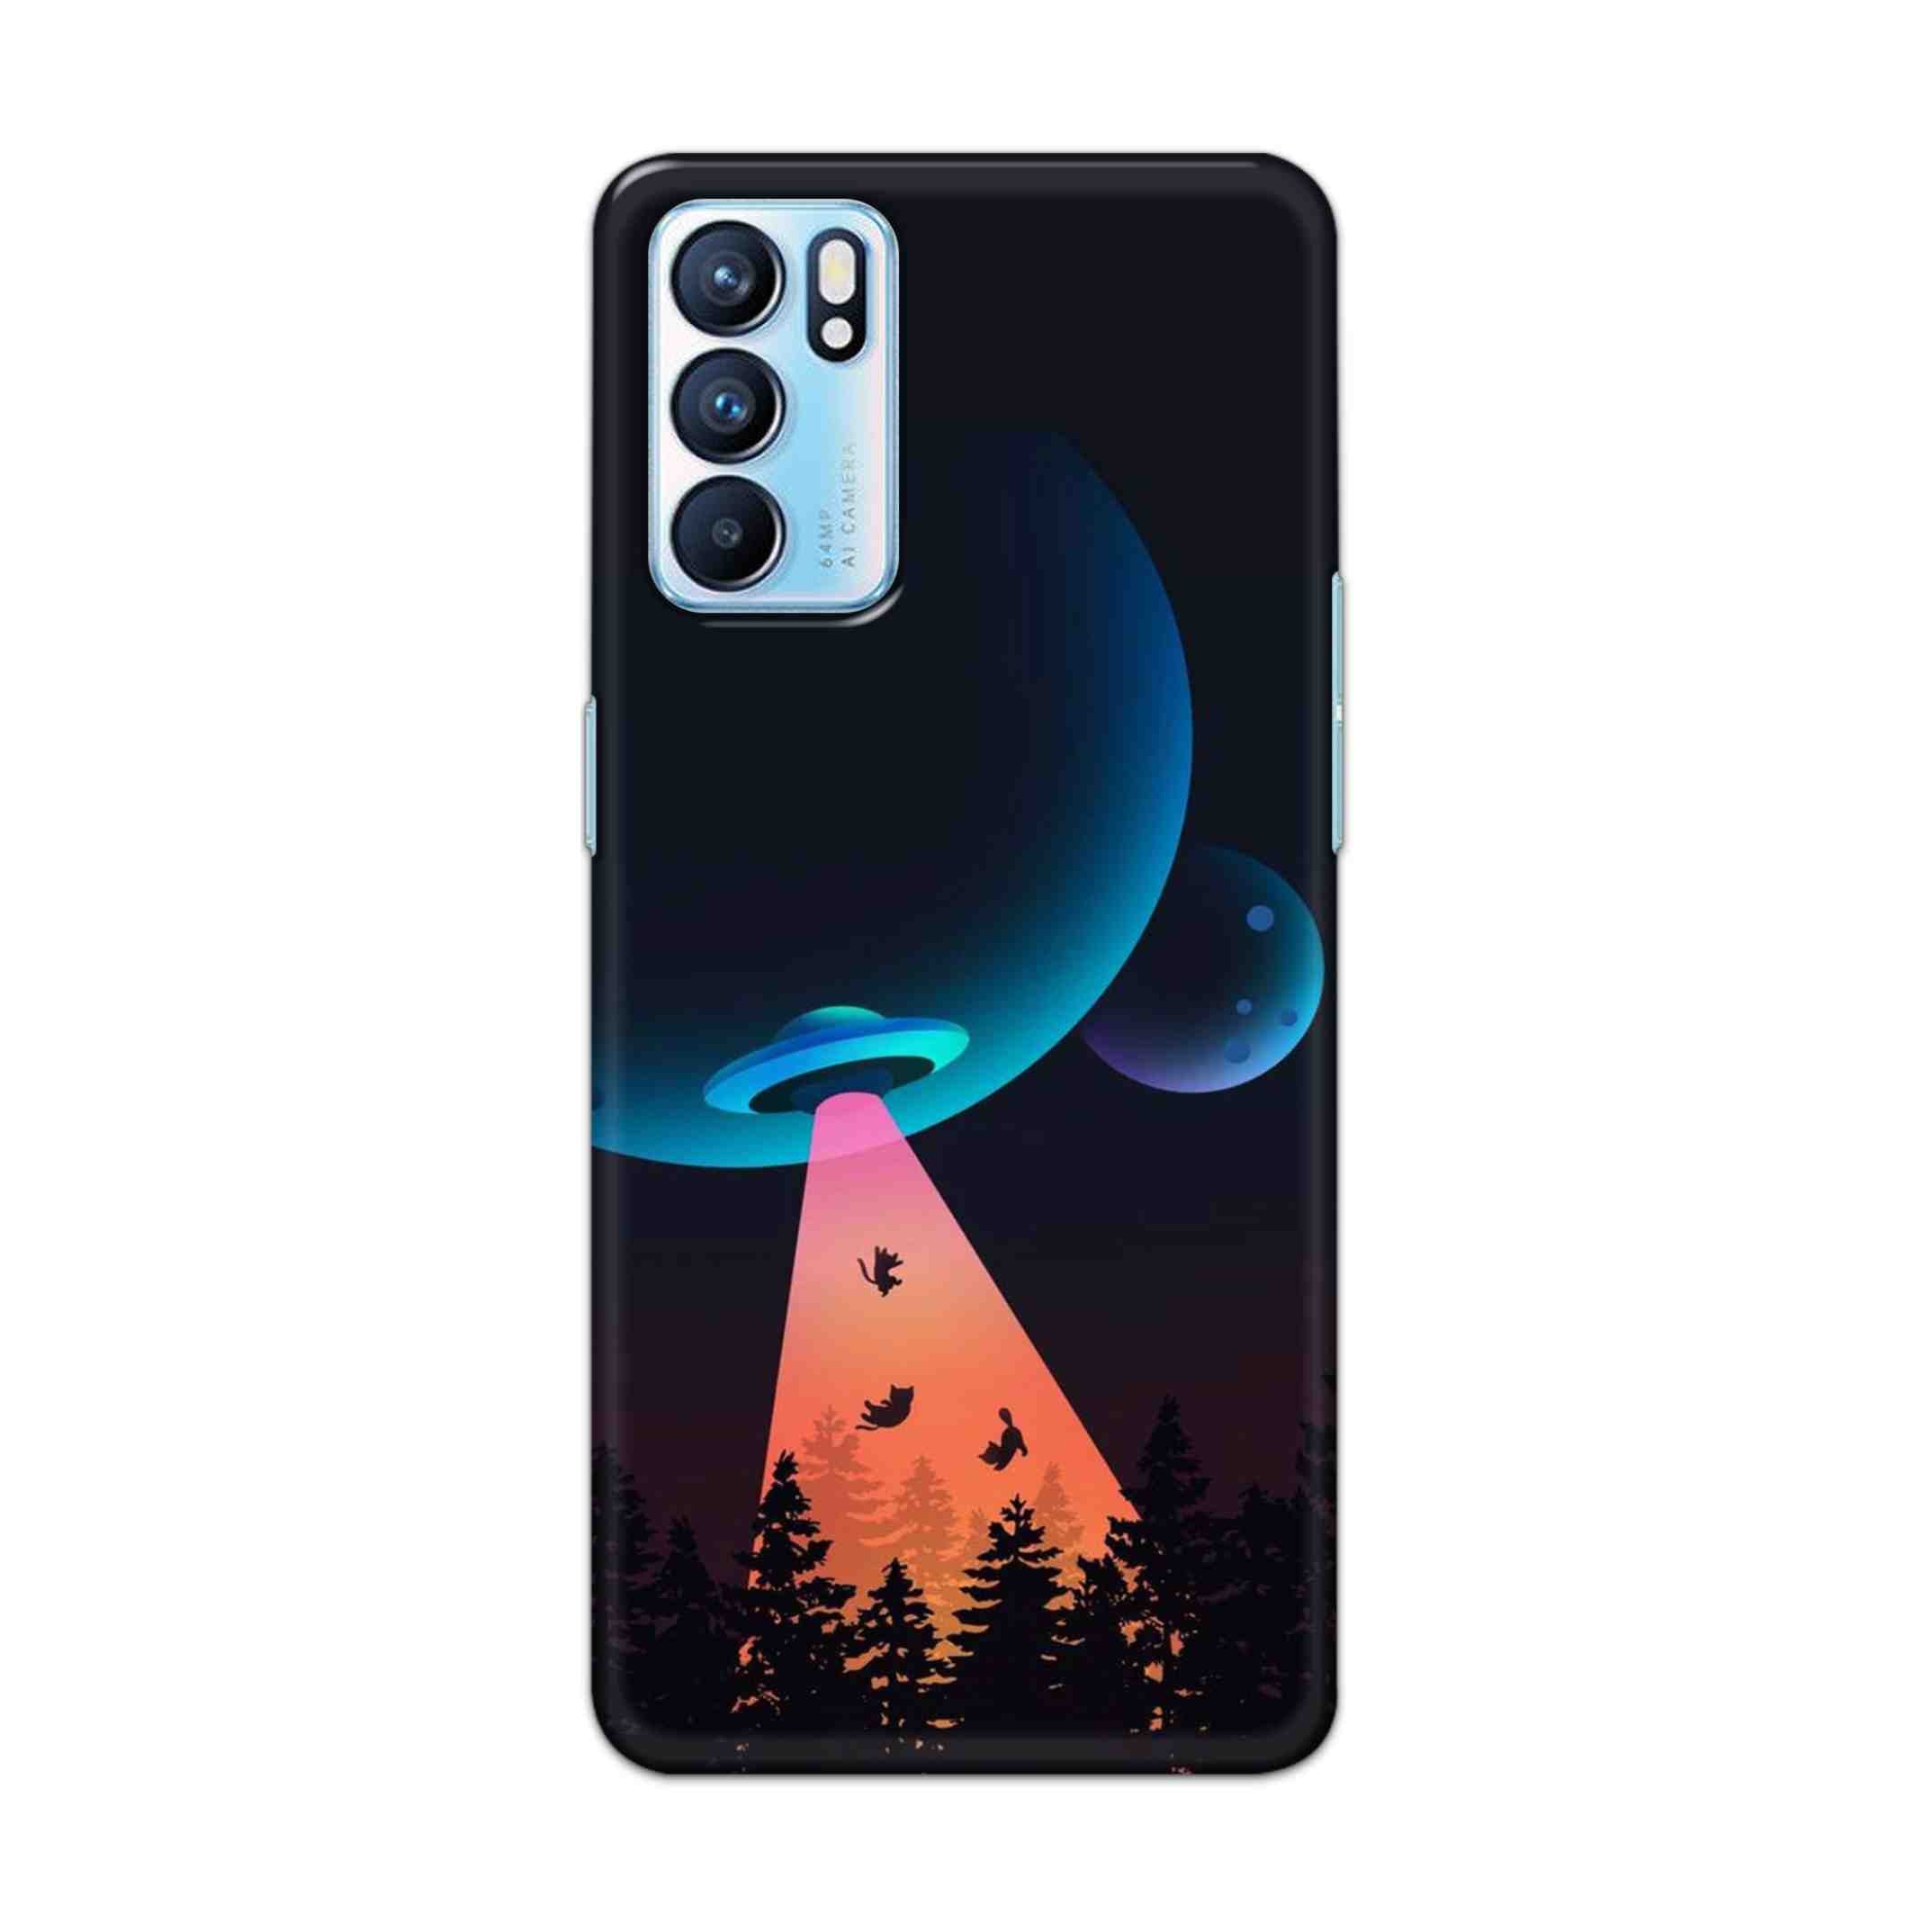 Buy Spaceship Hard Back Mobile Phone Case Cover For OPPO RENO 6 Online